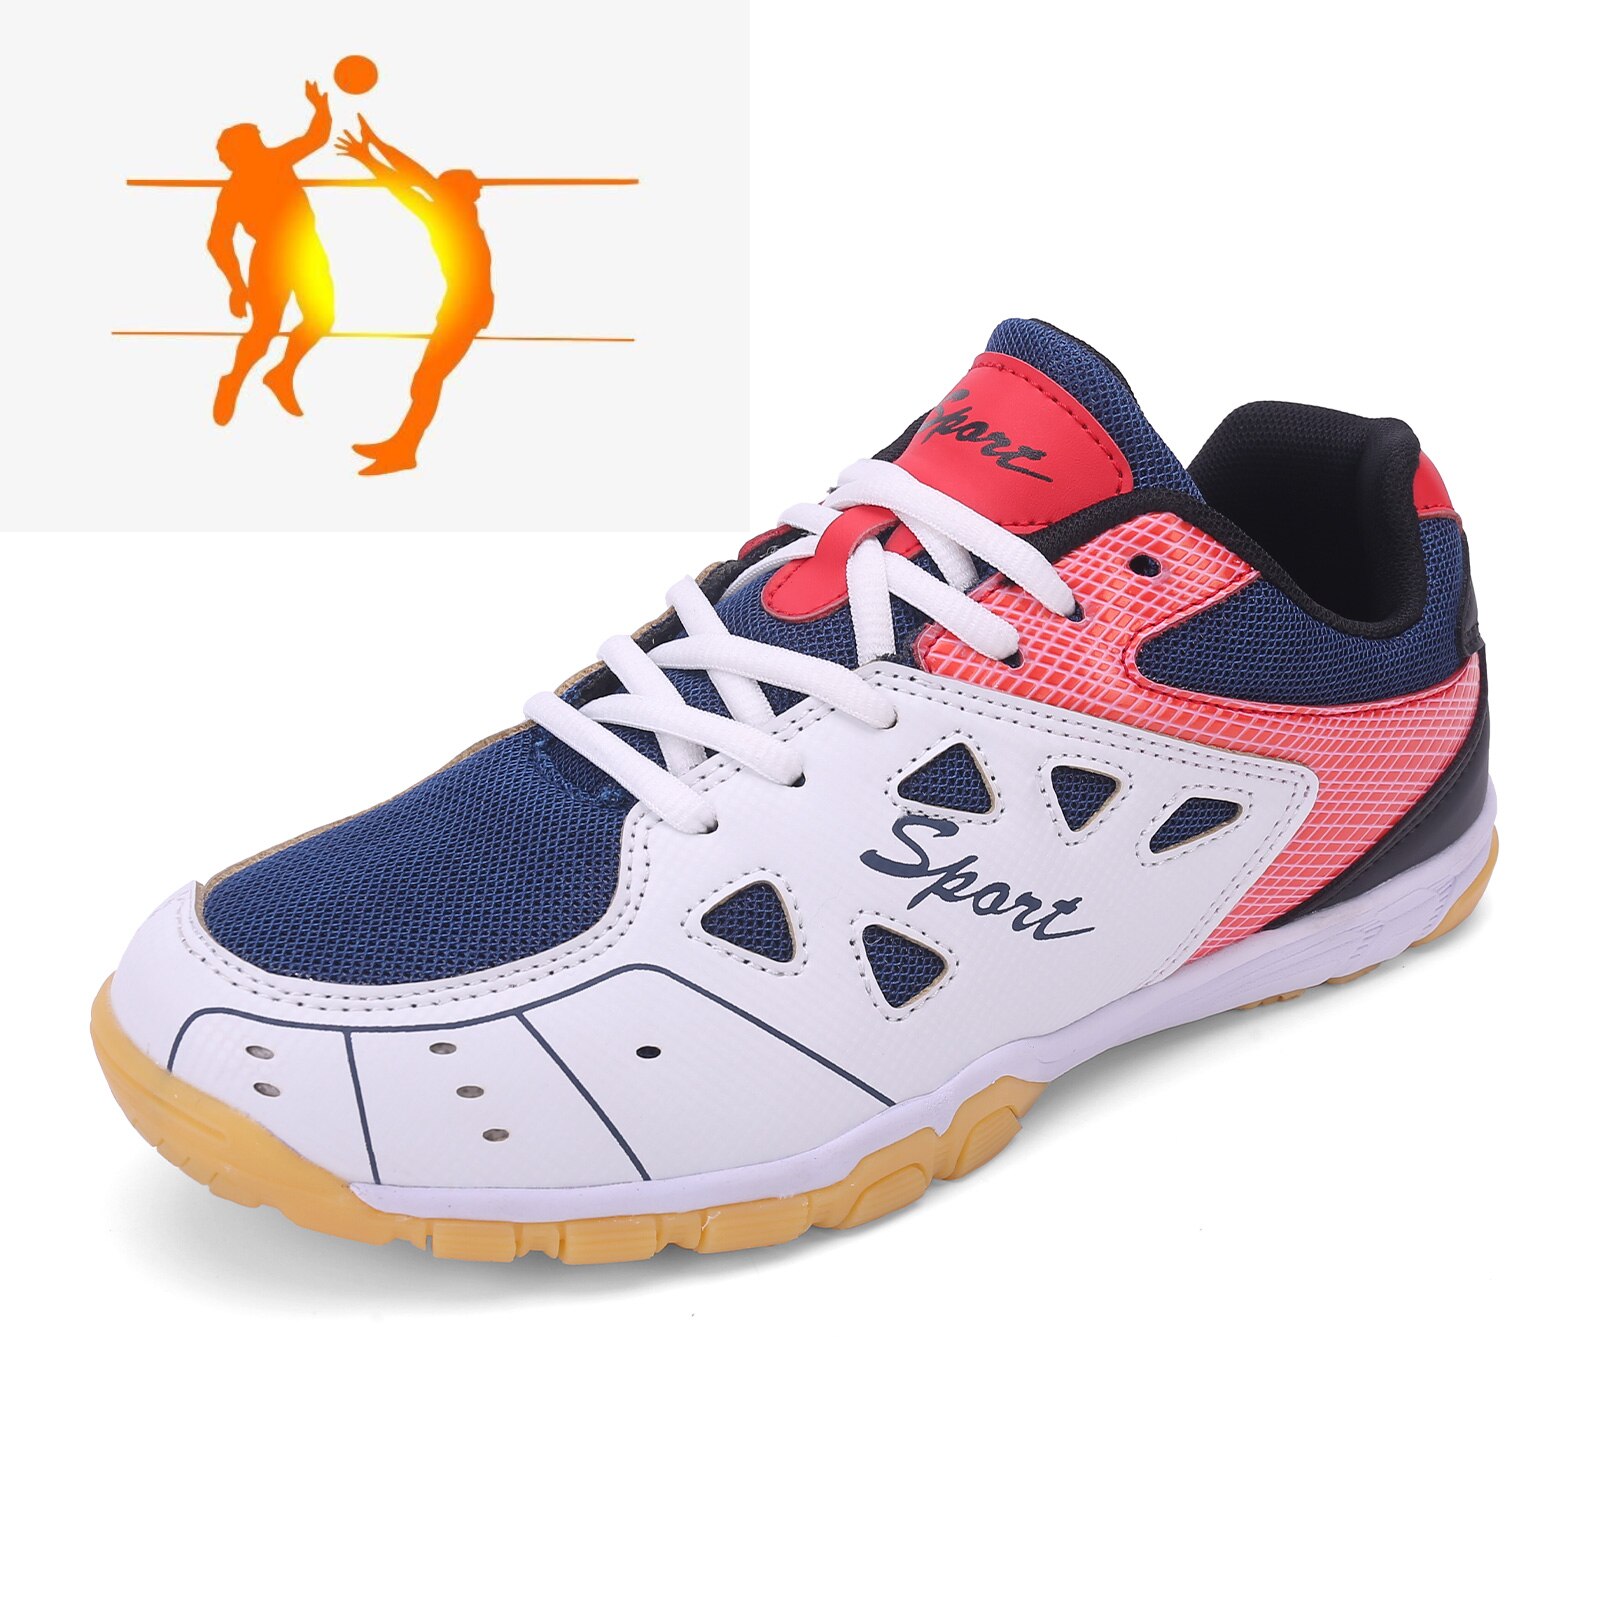 Professional Volleyball Shoes Men and Women Badminton Shoes Fitness Tennis Shoes UniVolleyball Shoes Sneakers Size 36-45